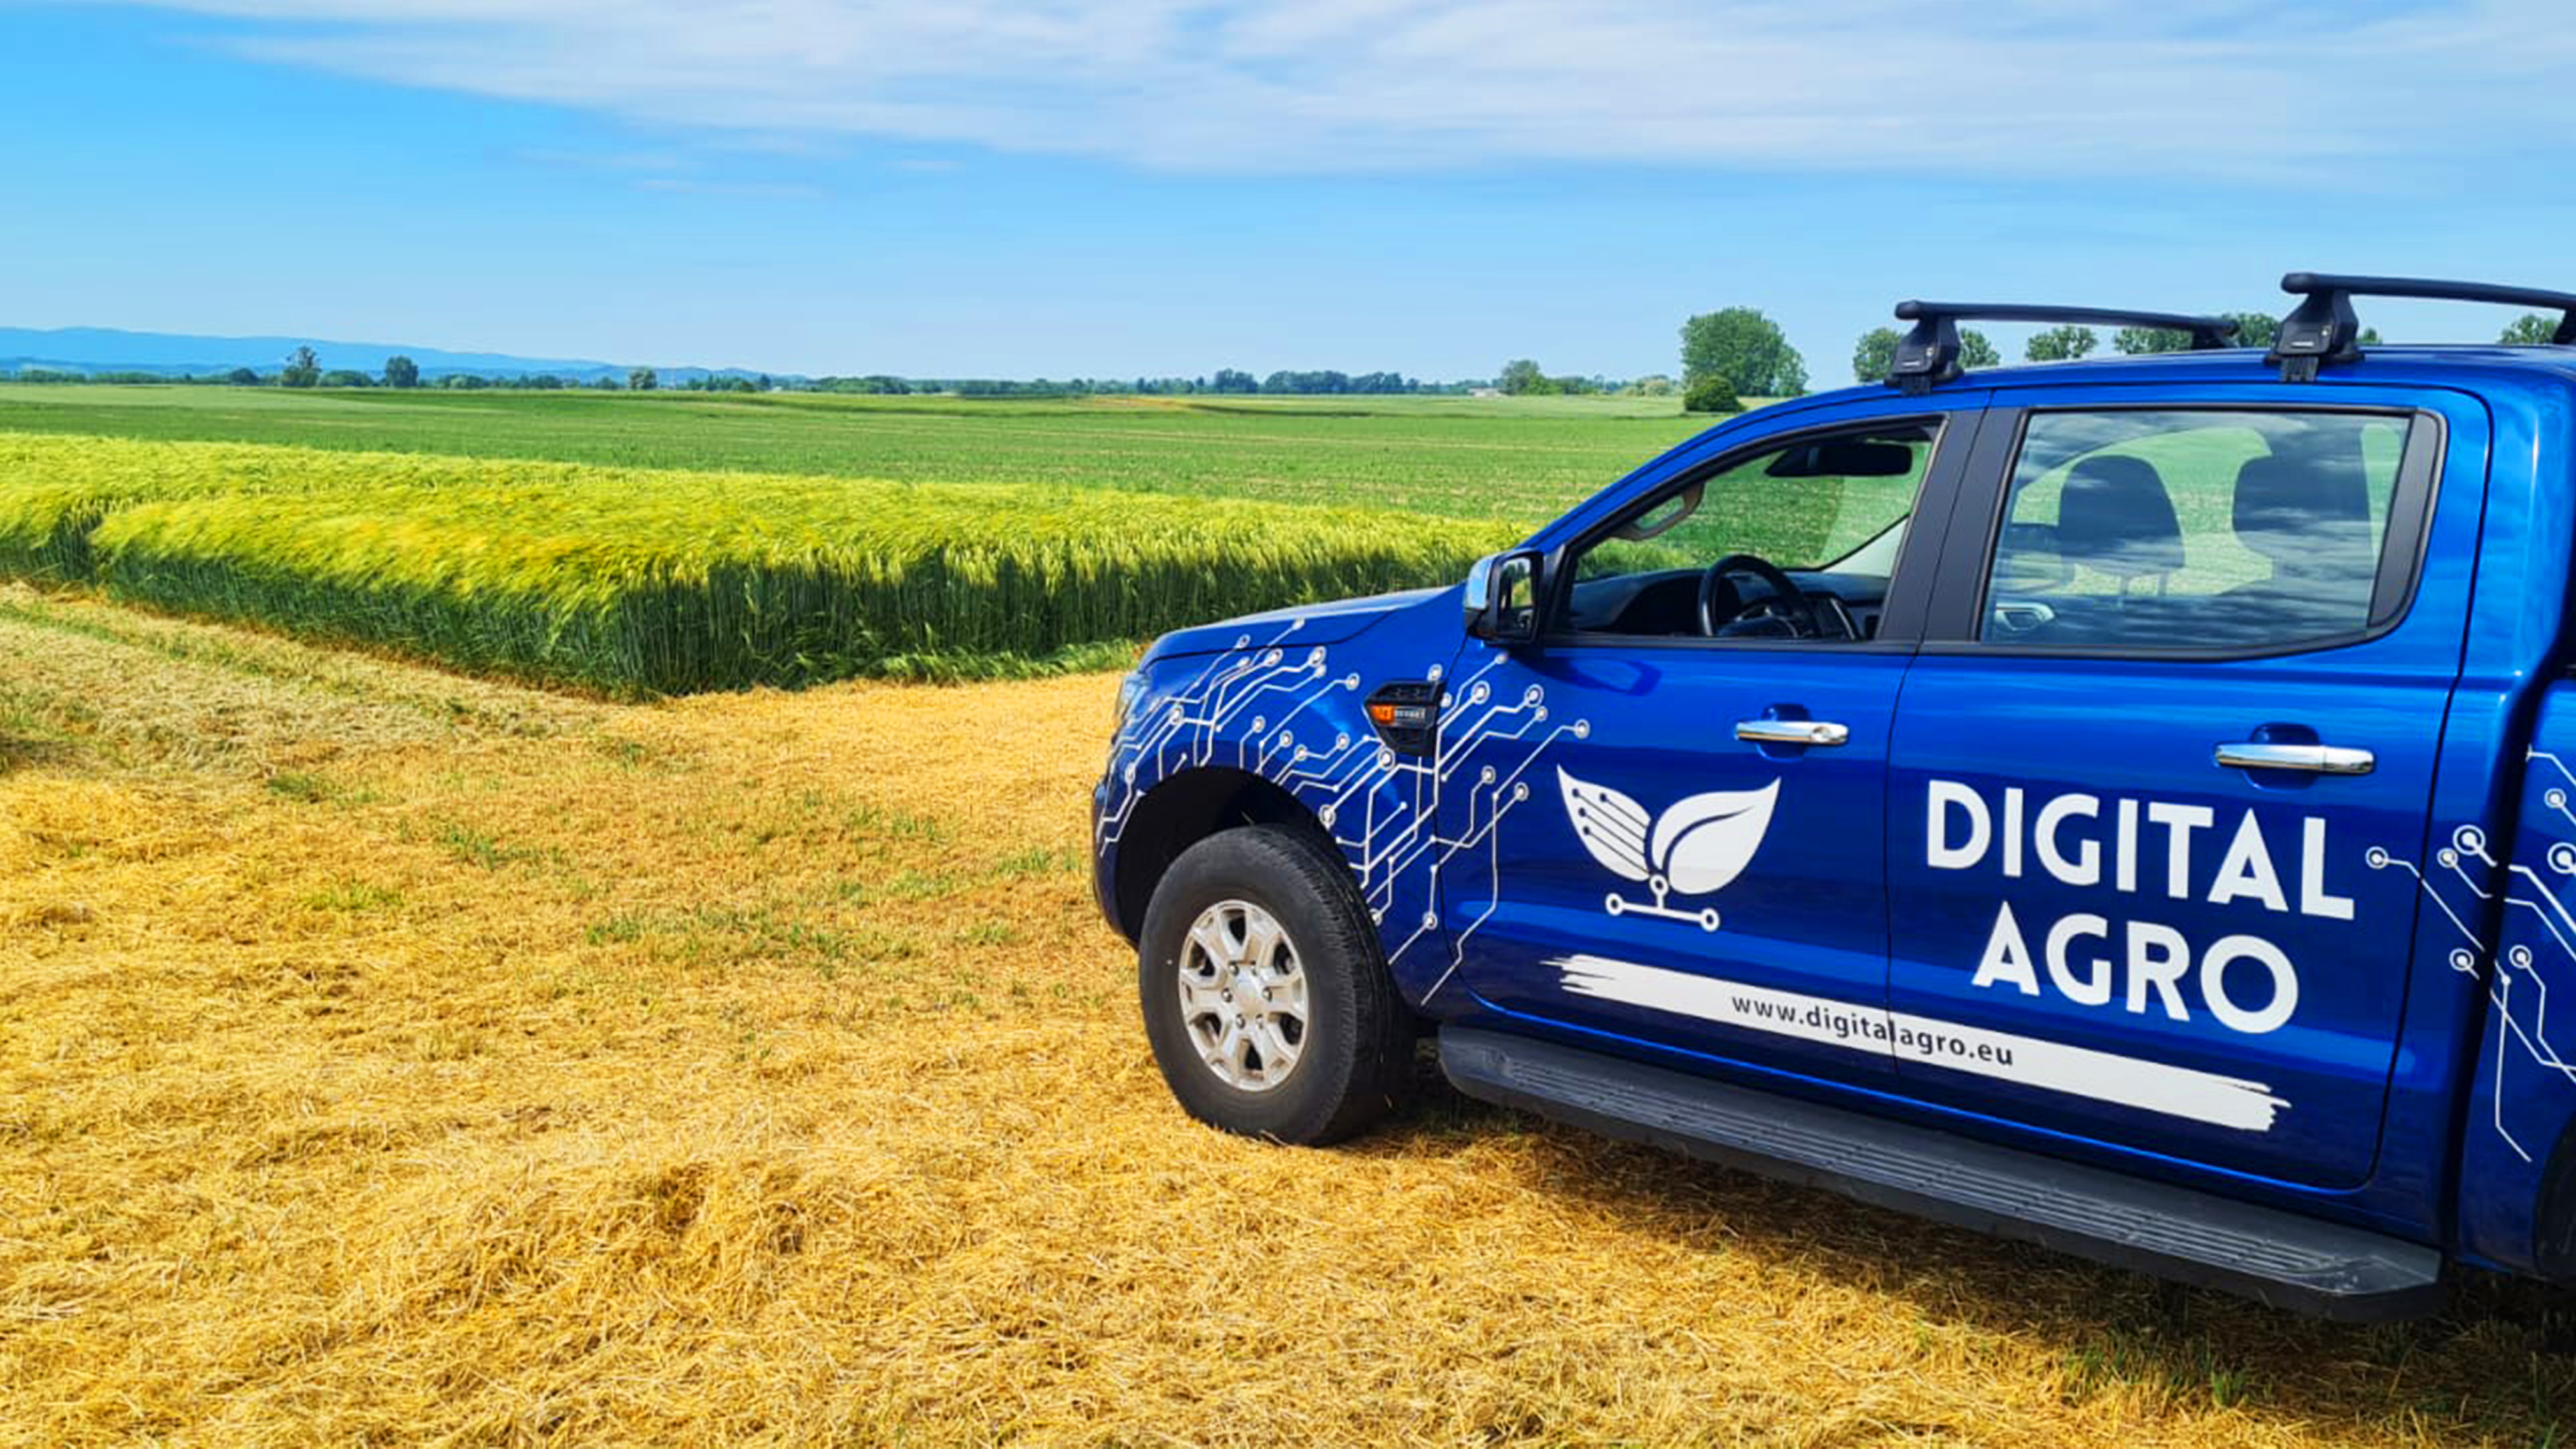 Blue pick up turck in a wheat field with Digital Agro written on the side